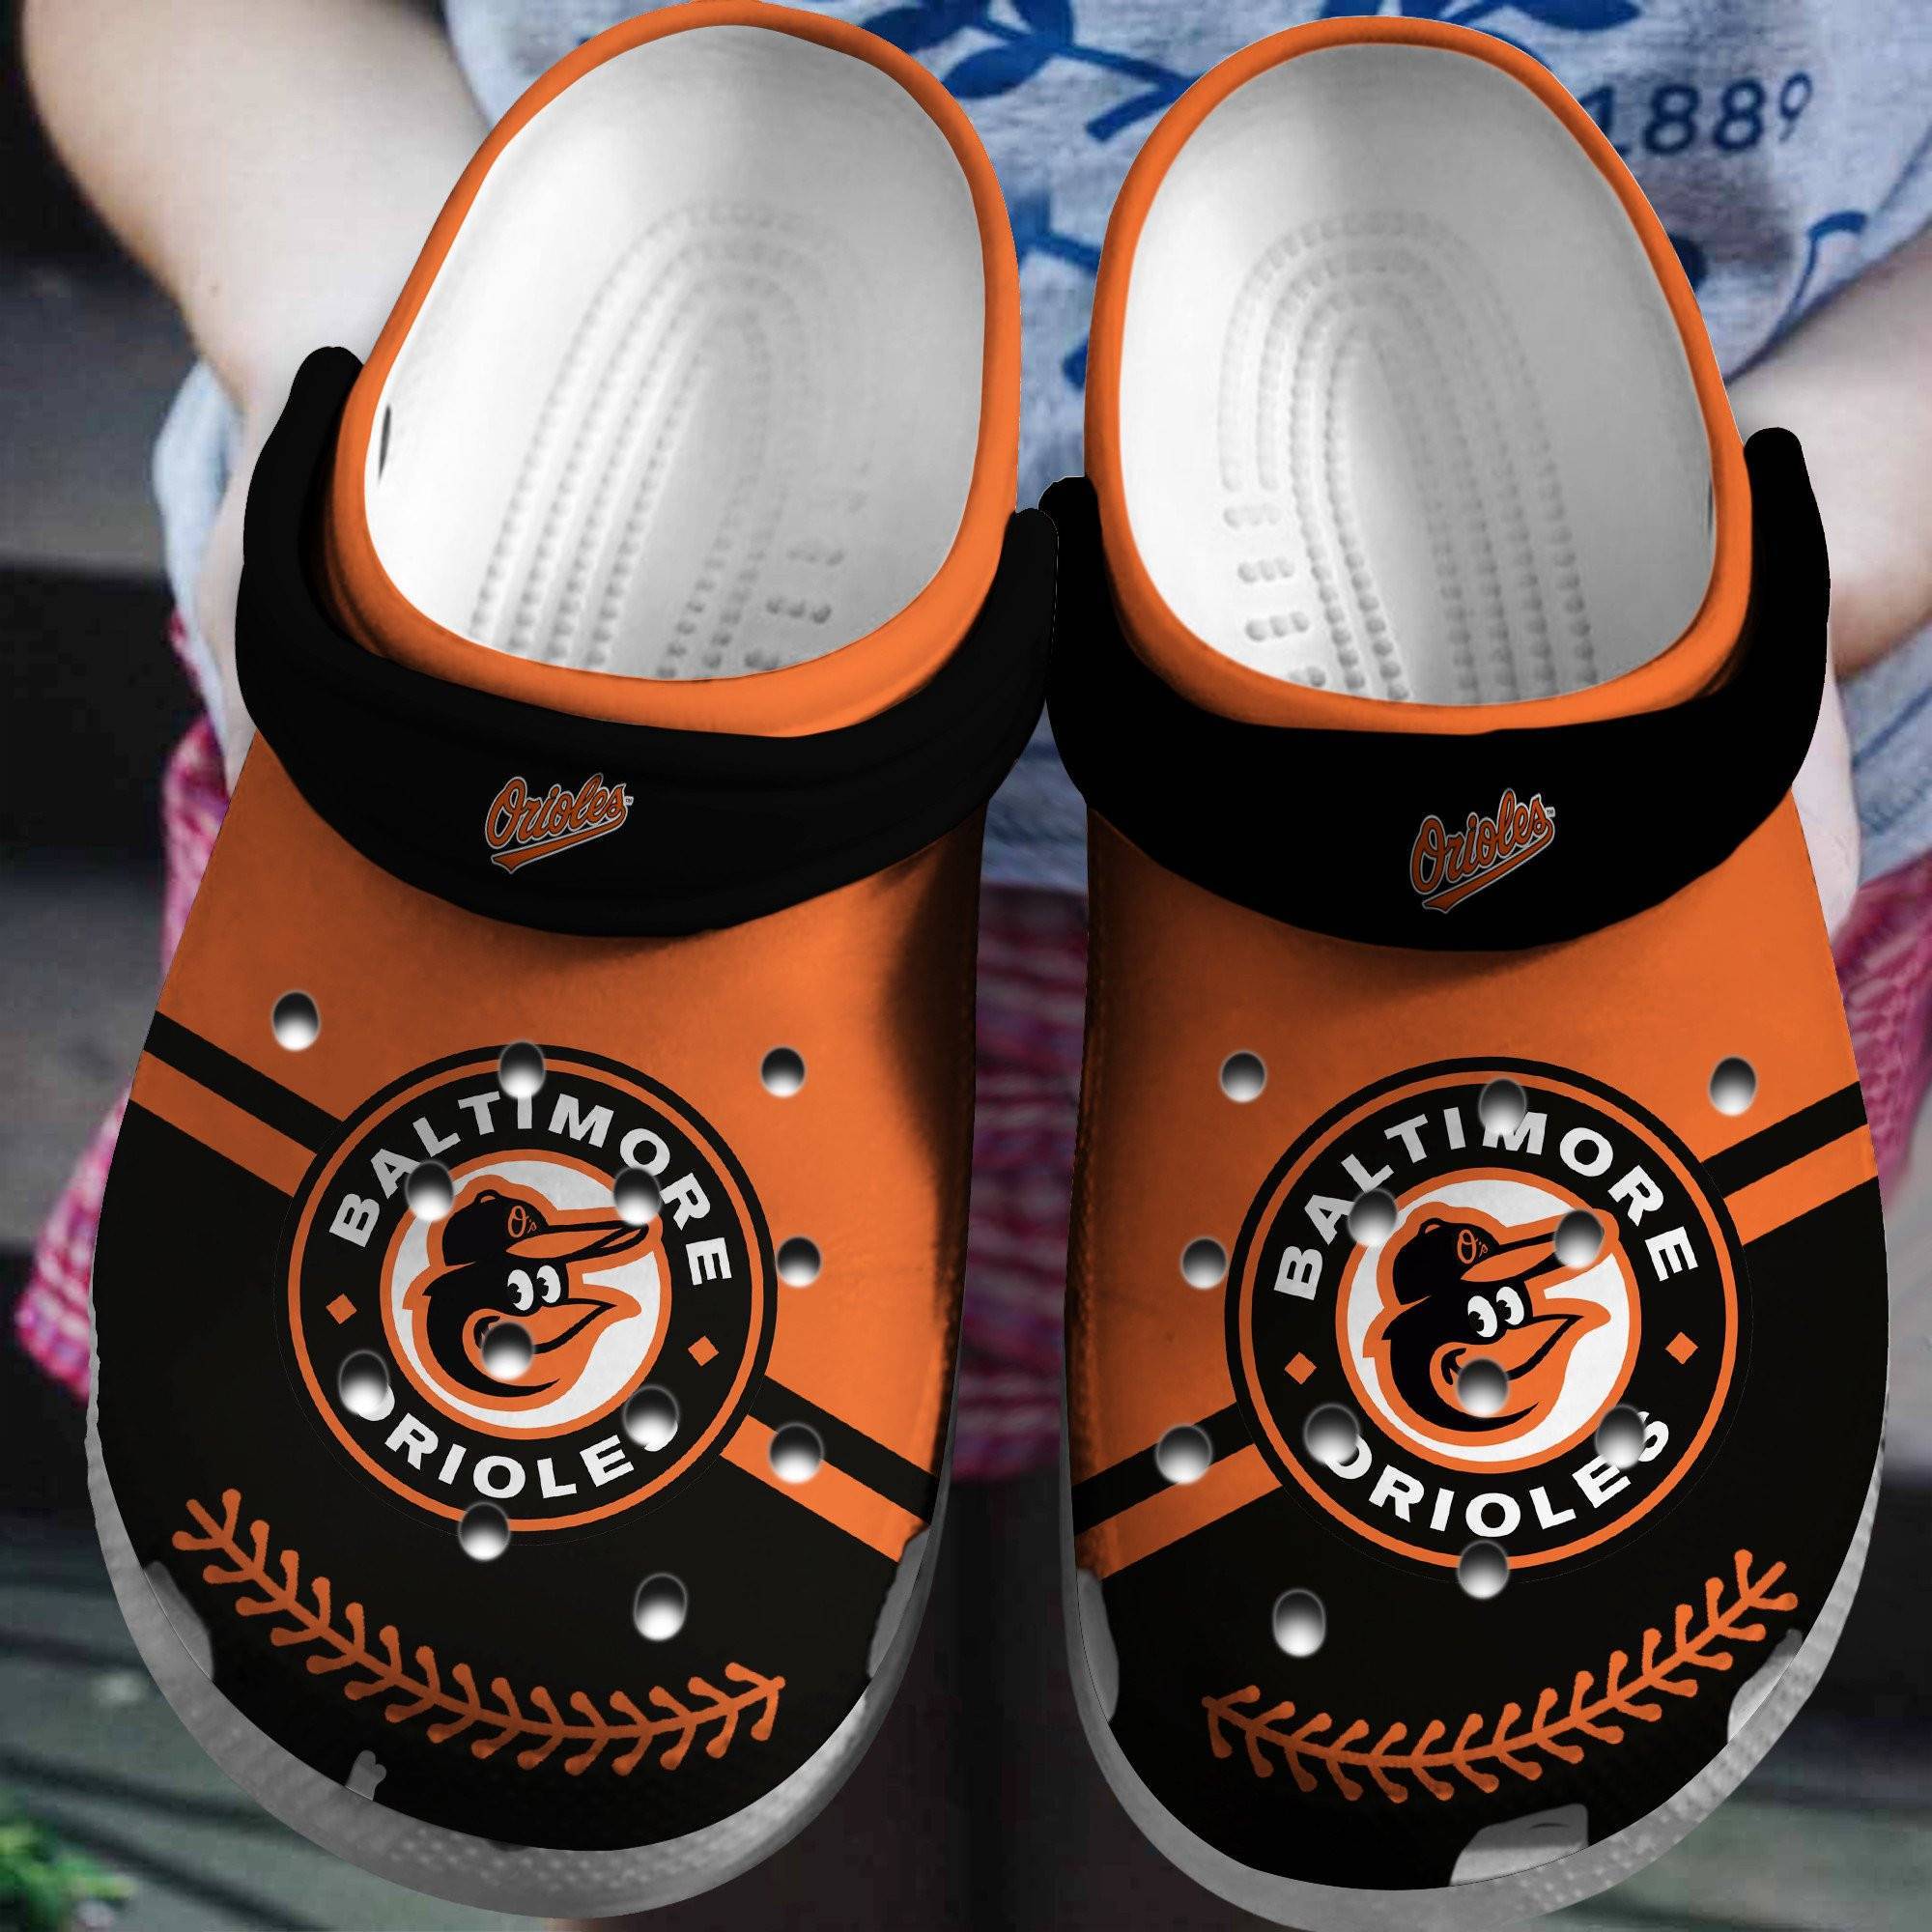 Hot Mlb Team Baltimore Orioles Black – Orange Crocss Clog Shoesshoes Trusted Shopping Online In The World